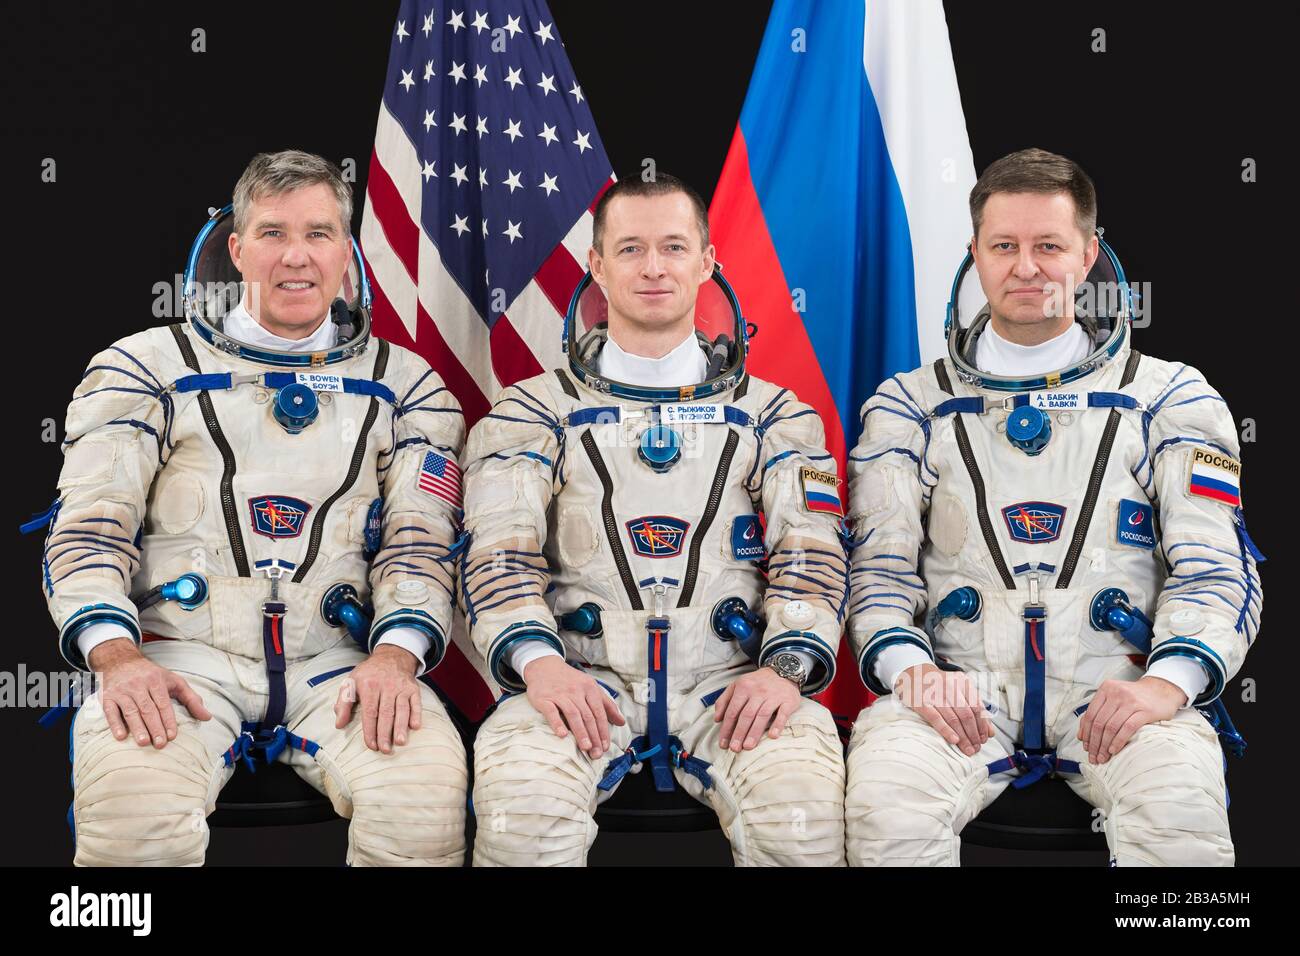 STAR CITY, RUSSIA - 18 Dec 2019 - The backup Expedition 63 crewmembers pose for a portrait at the Gagarin Cosmonaut Training Center in Star City, Russ Stock Photo